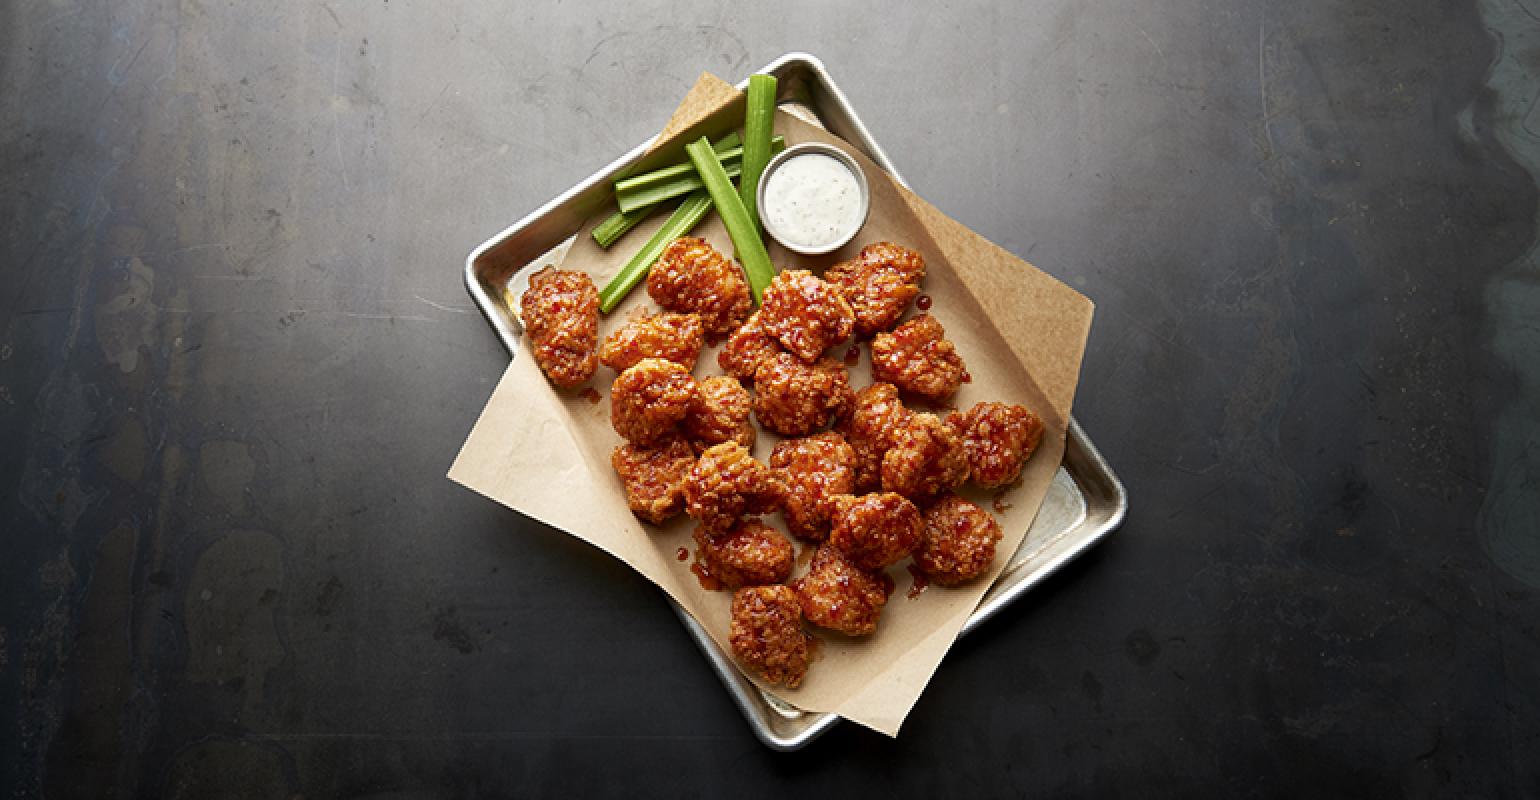 Buffalo Wild Wings continues to elevate bar-food game | Nation's Restaurant News